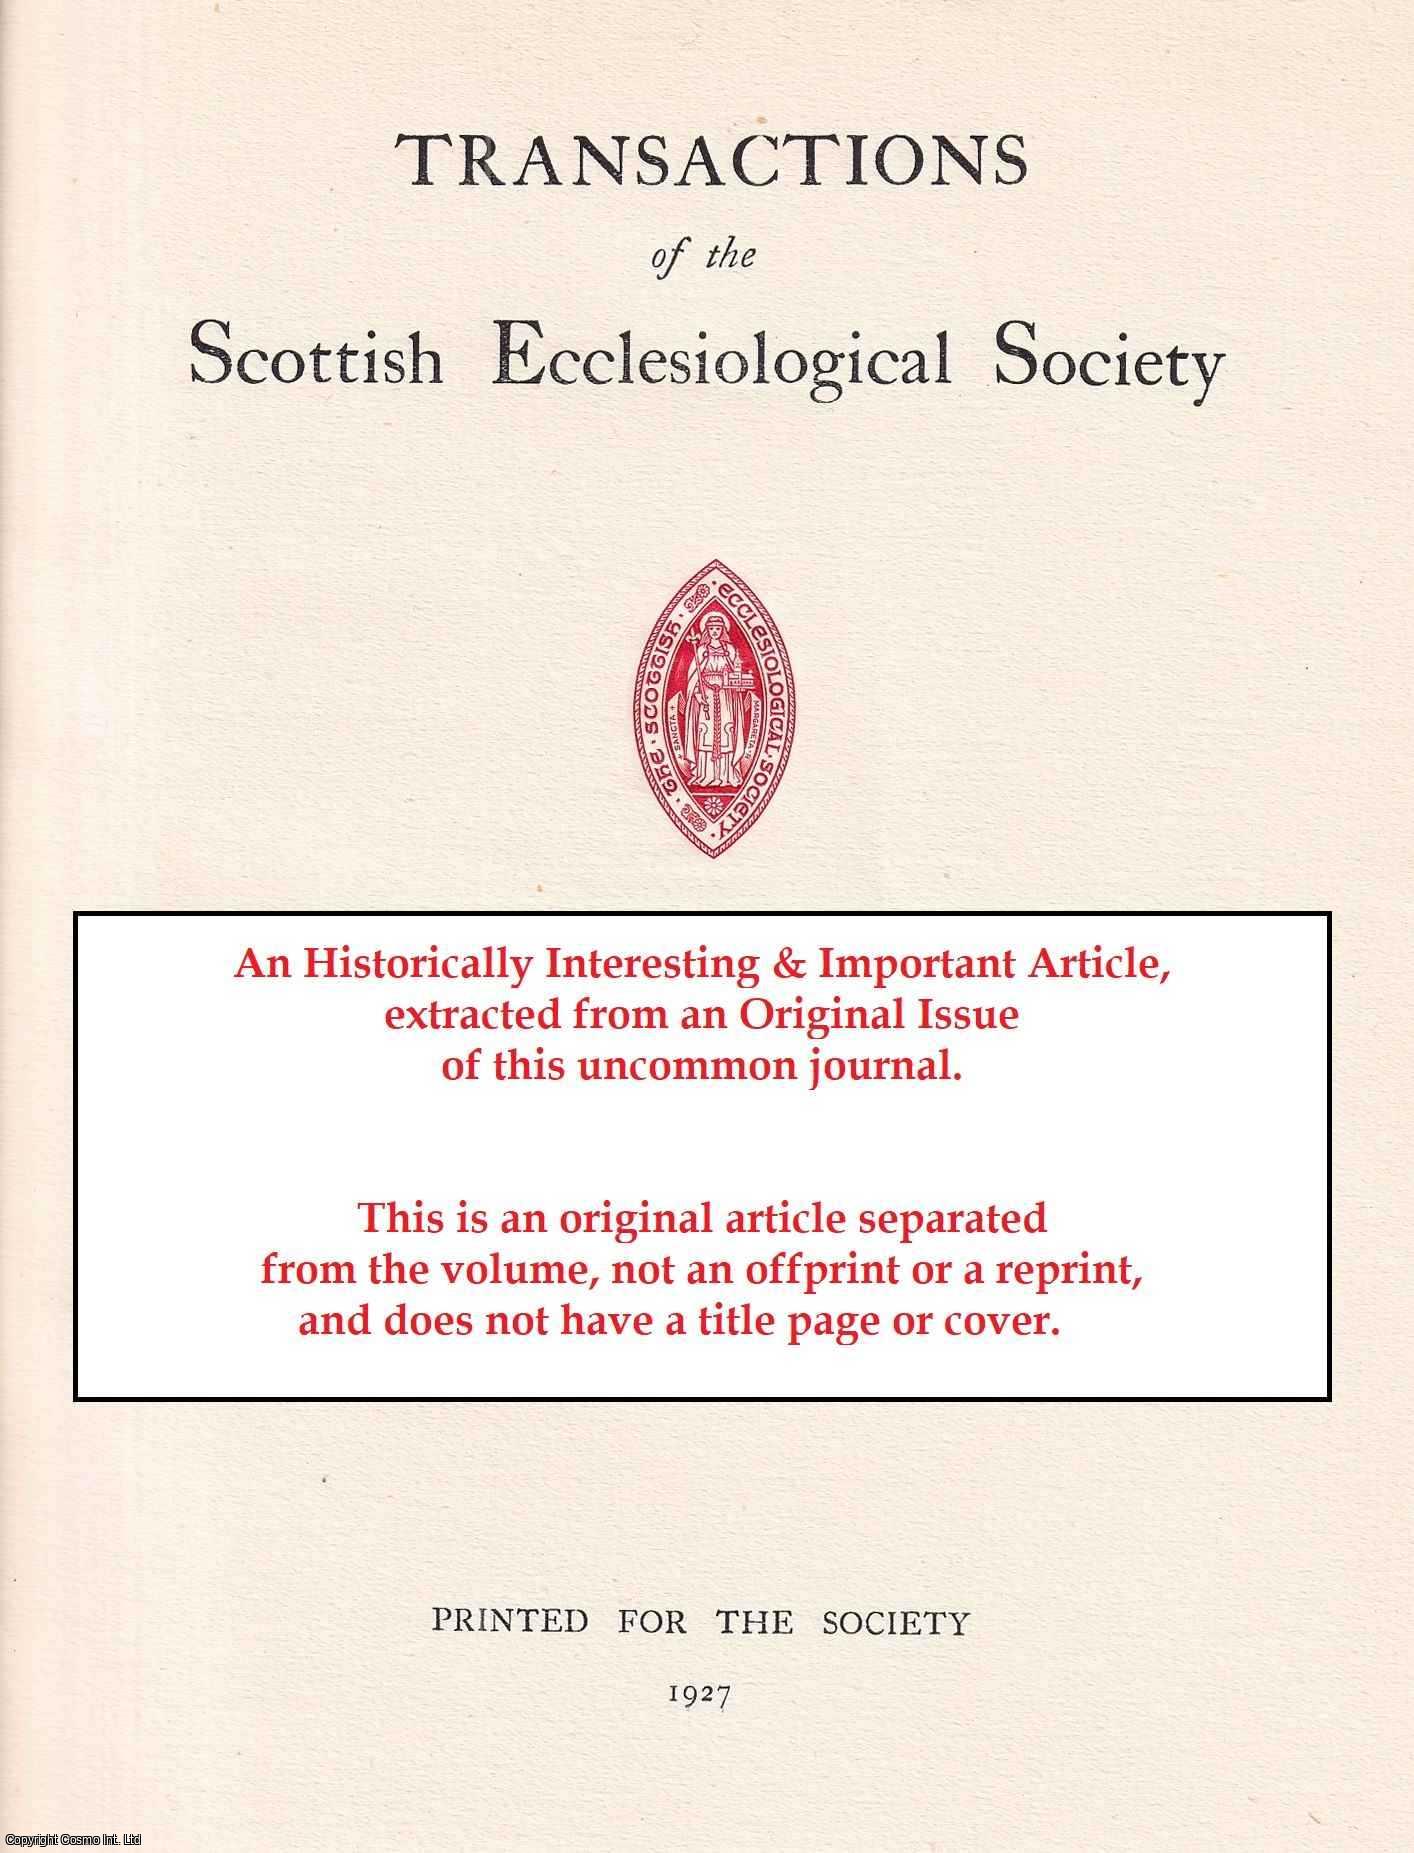 William Burnett - Restalrig and Its Collegiate Church. An original article from the Transactions of the Scottish Ecclesiological Society, 1908.